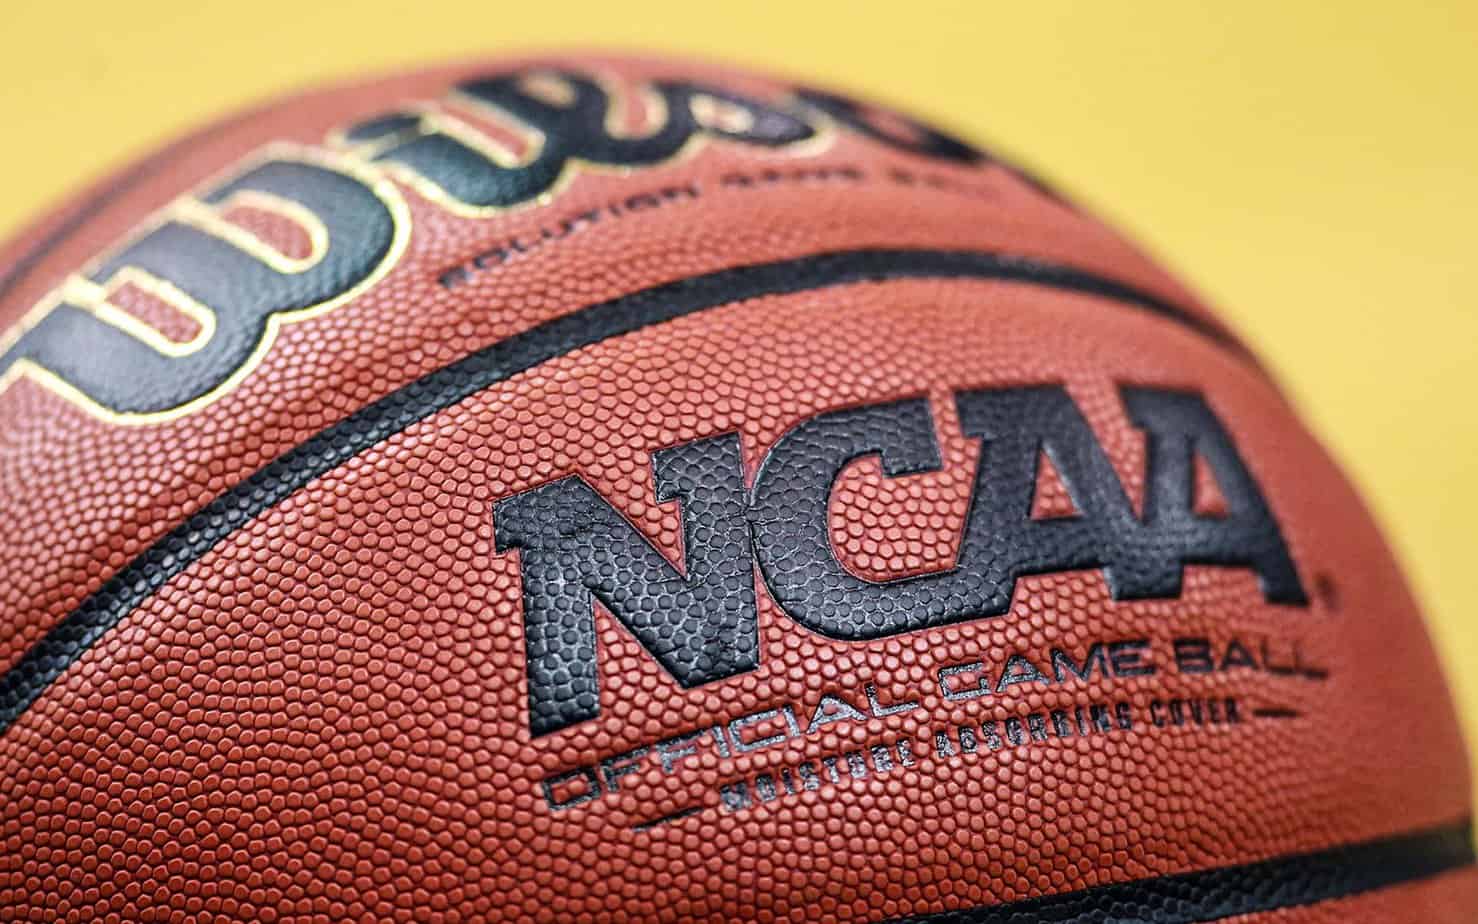 NCAA: Right to Suspension